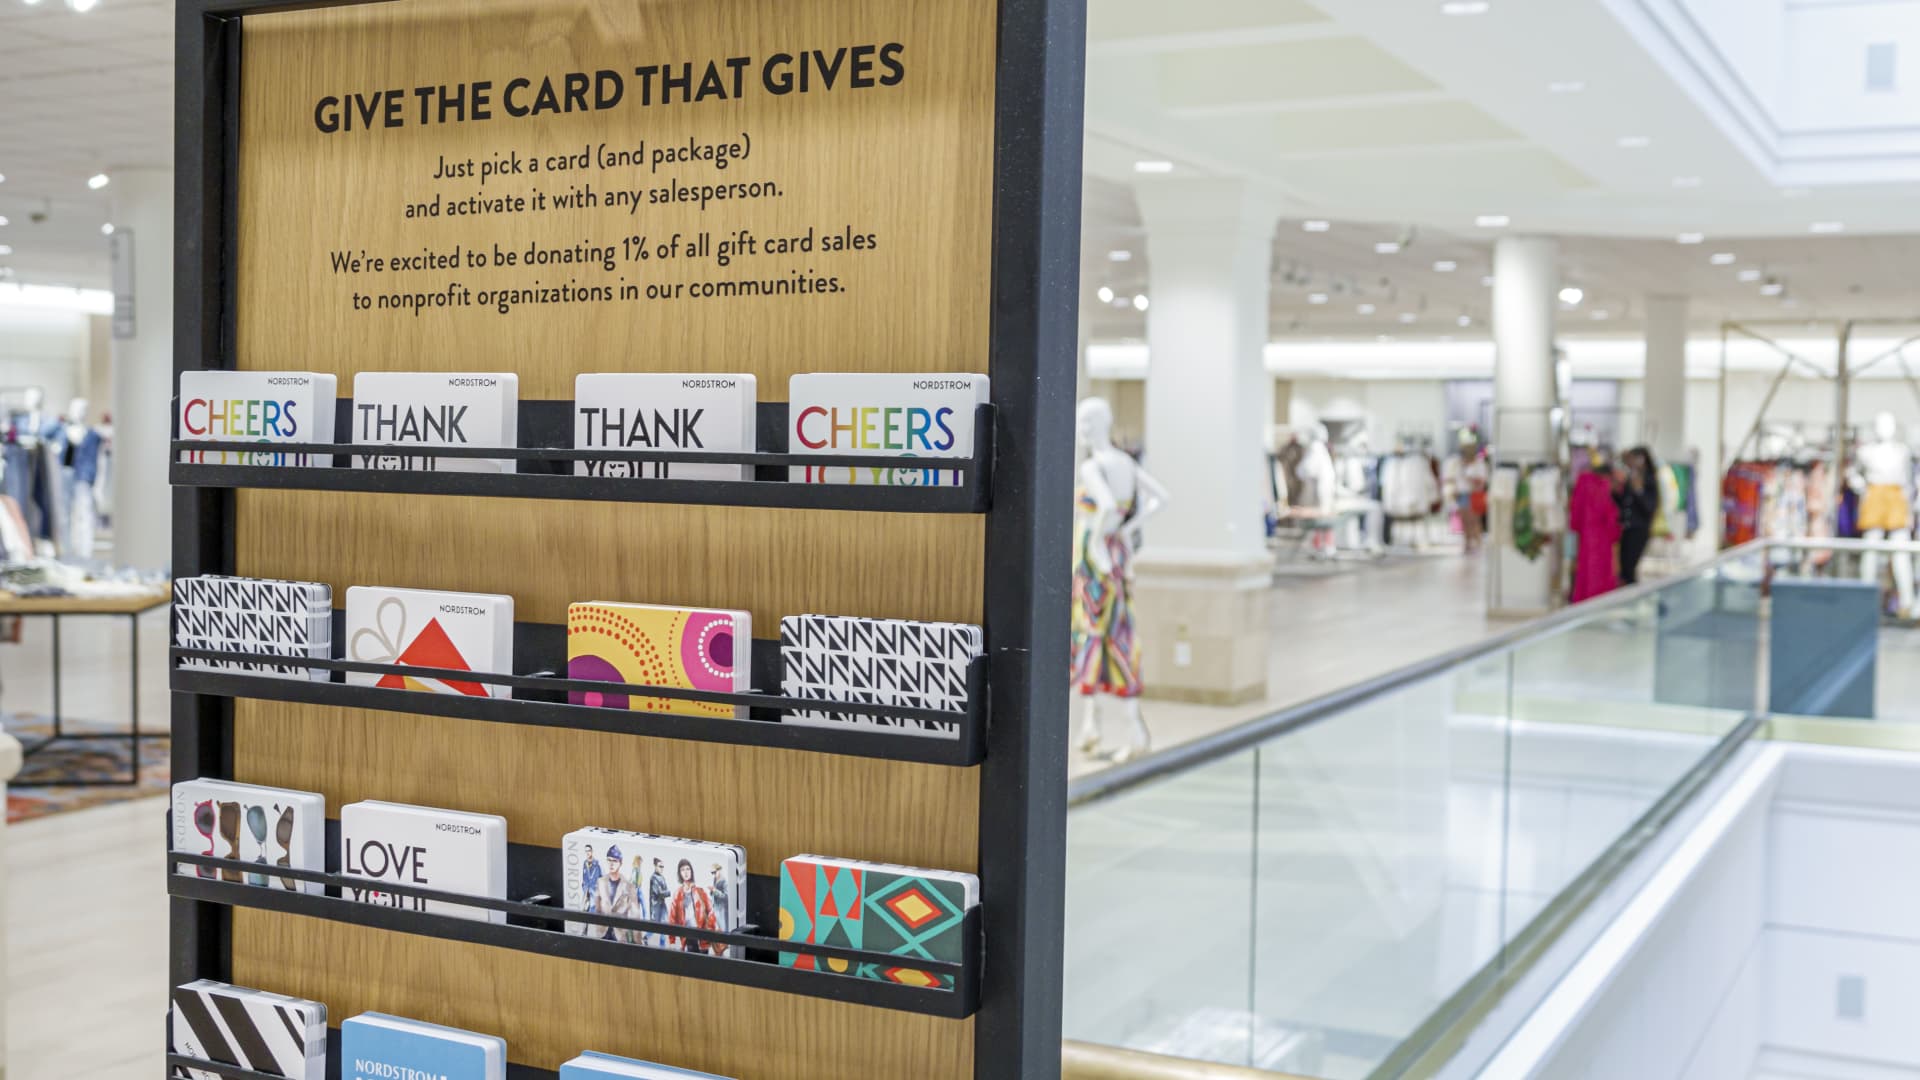 How To Sell Unwanted Gift Cards For Cash